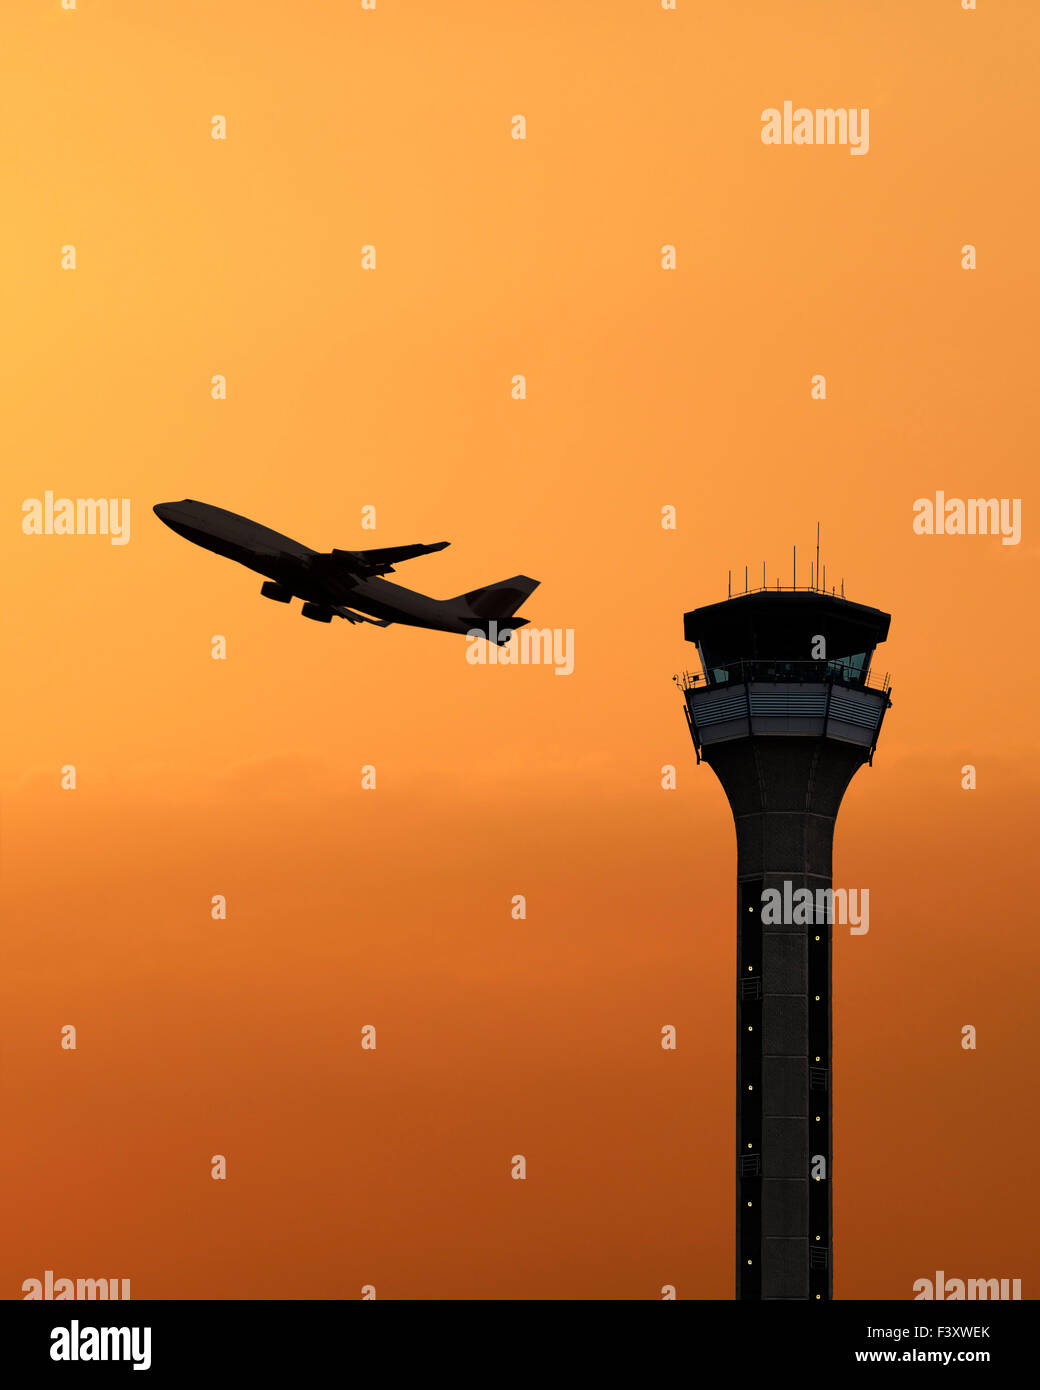 Air traffic control tower with a plane taking off at sunset. Luton Airport, UK. Stock Photo